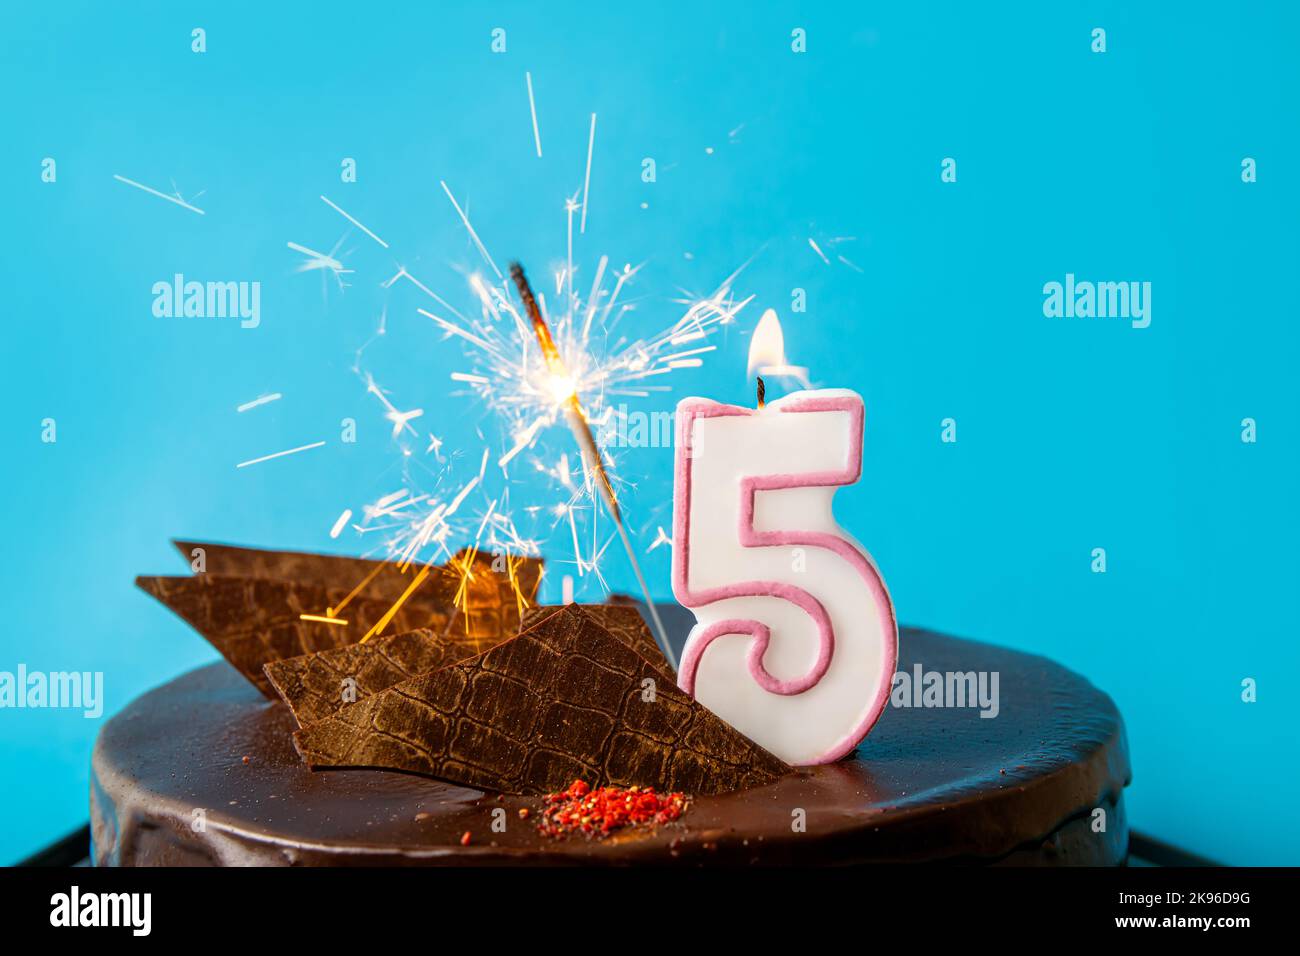 Number 5 birthday candle burning and sparkler with sparks fly on cake. The fifth birthday or anniversary celebration concept. Lot of copy space. Stock Photo